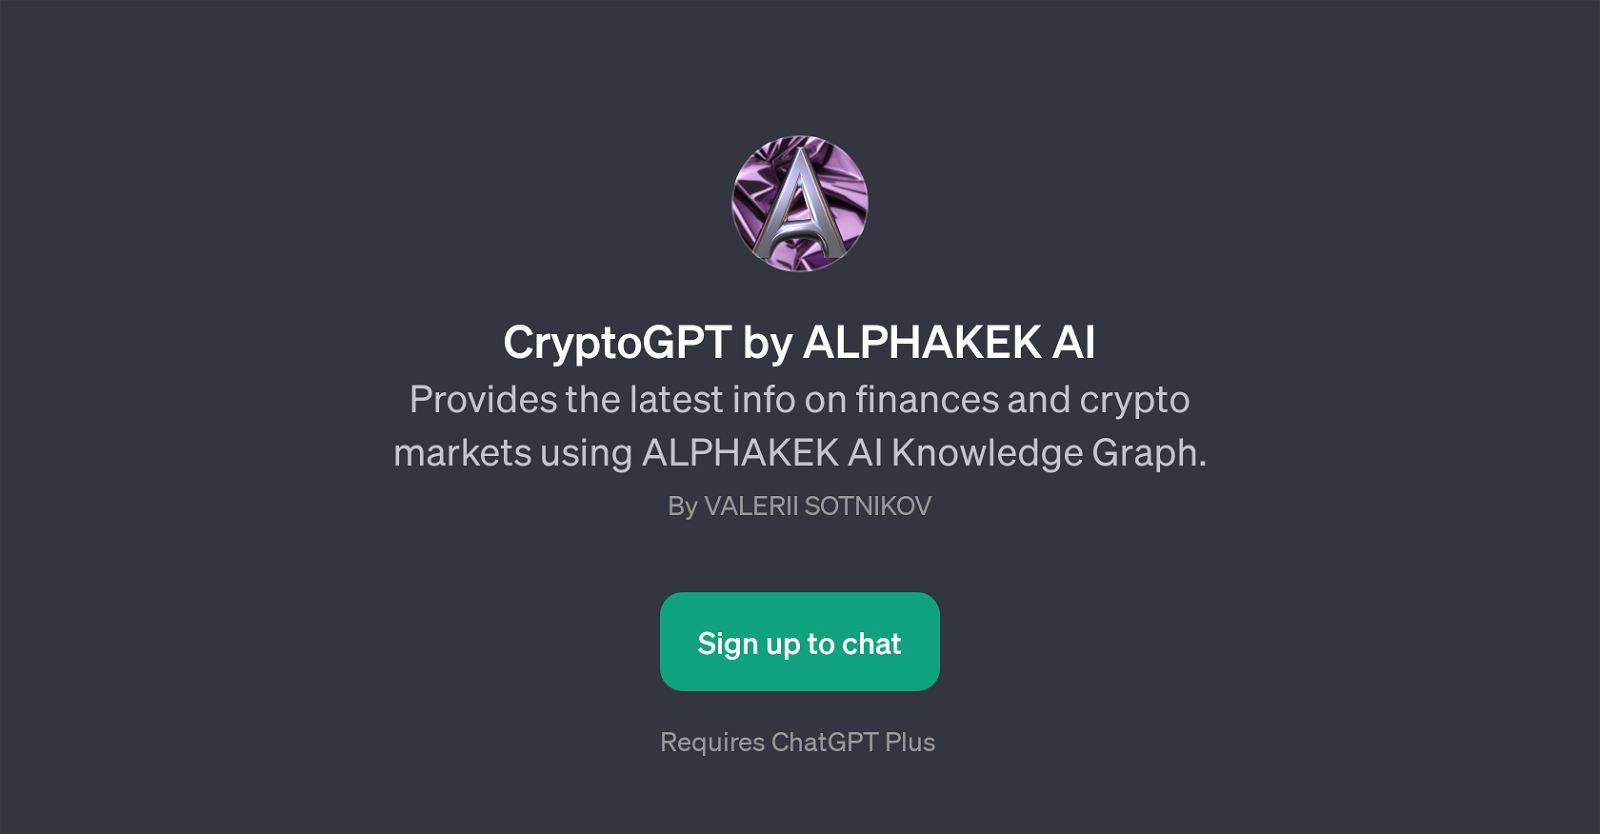 CryptoGPT by ALPHAKEK AI website